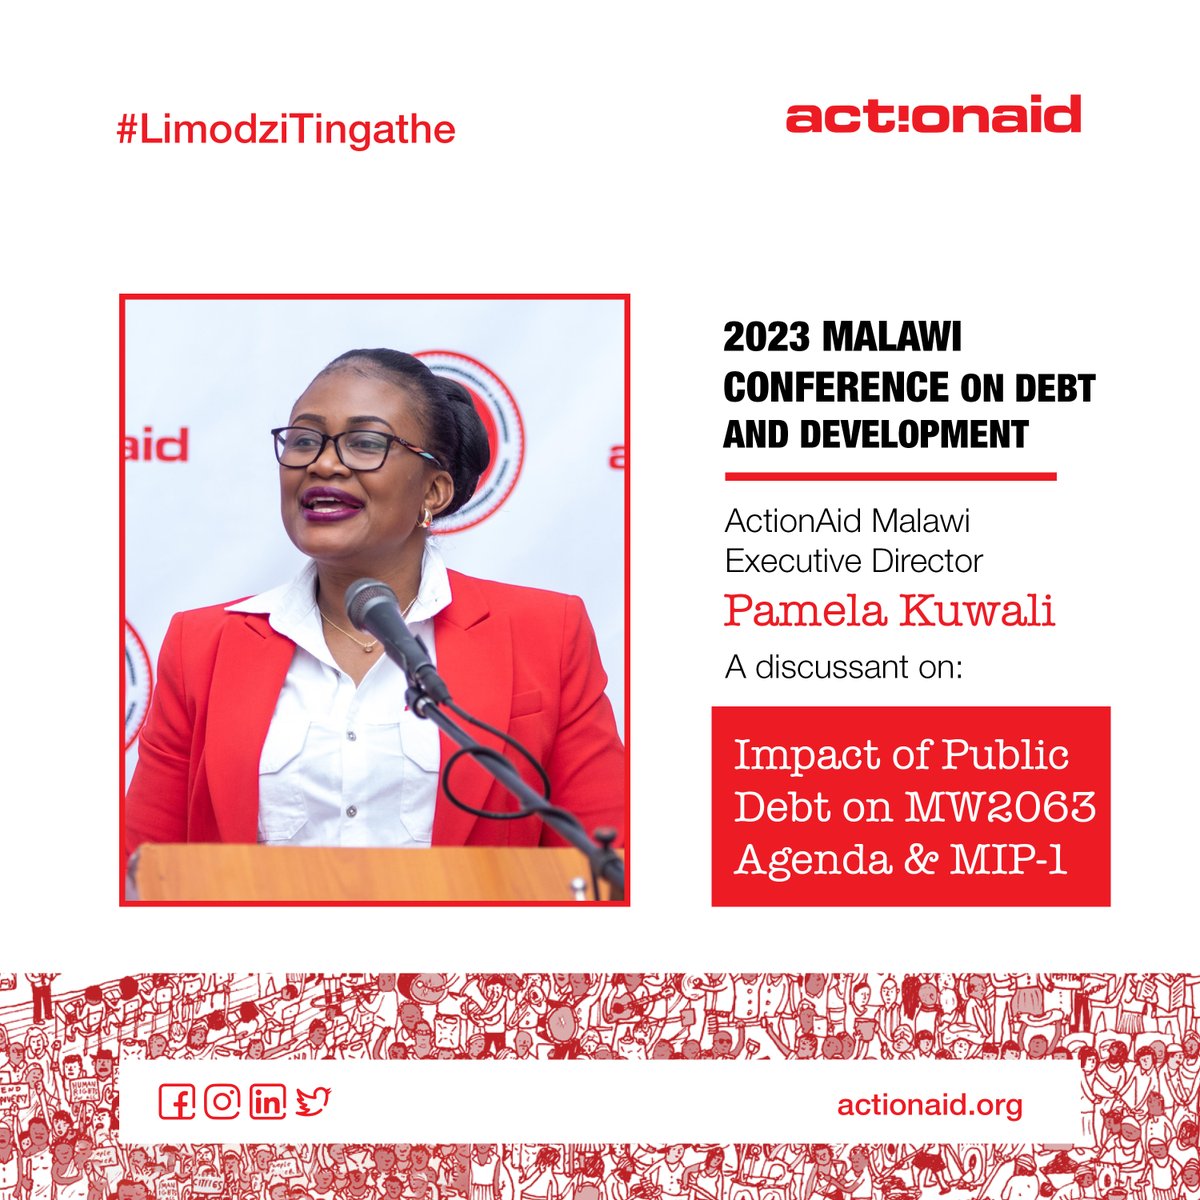 #2023MalawiConferenceonDebt Find out our Executive Director, Pamela Kuwali's take on the 'Impact of Public Debt on Malawi 2063 and its ten year implementation plan' as she joins fellow discussants on the topic in a moment.fb.watch/l-zWmP6ASD/